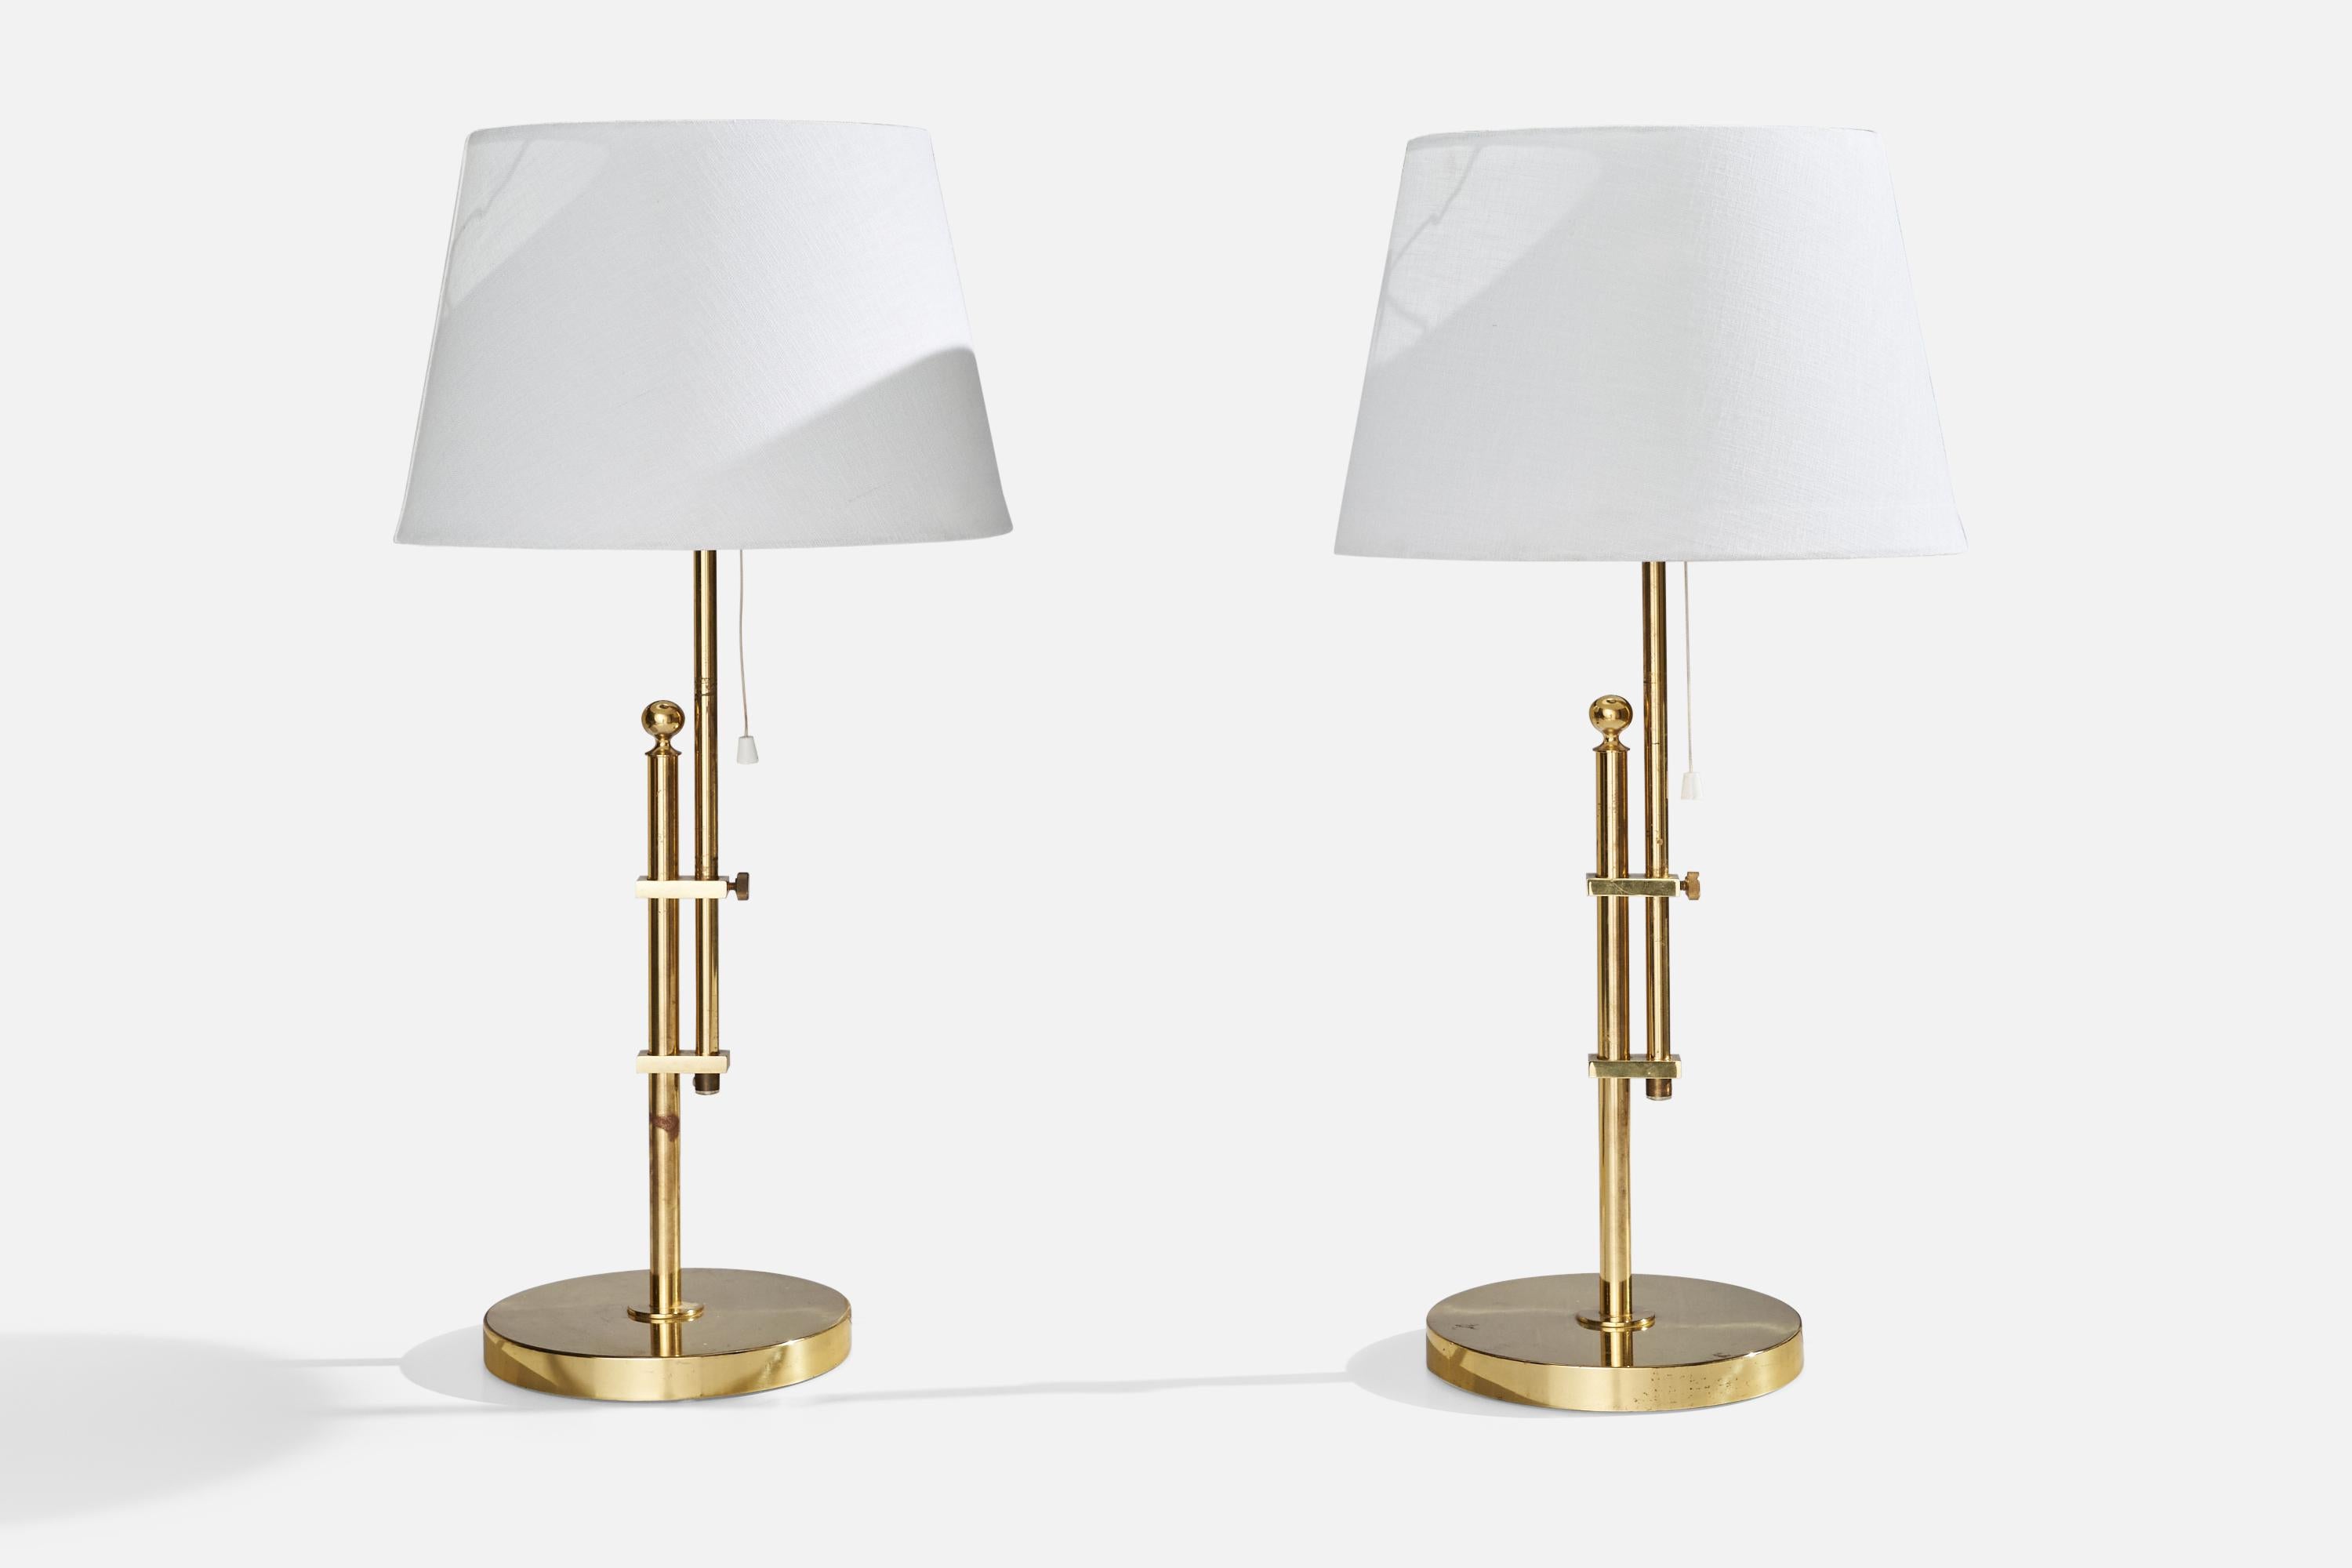 A pair of adjustable brass table lamps designed and produced by Bergboms, Sweden, c. 1980s.

Dimensions variable.
Dimensions of Lamp (inches): 20.5” H x 7.25” Diameter
Dimensions of Shade (inches): 9” Top Diameter x 12” Bottom Diameter x 9”